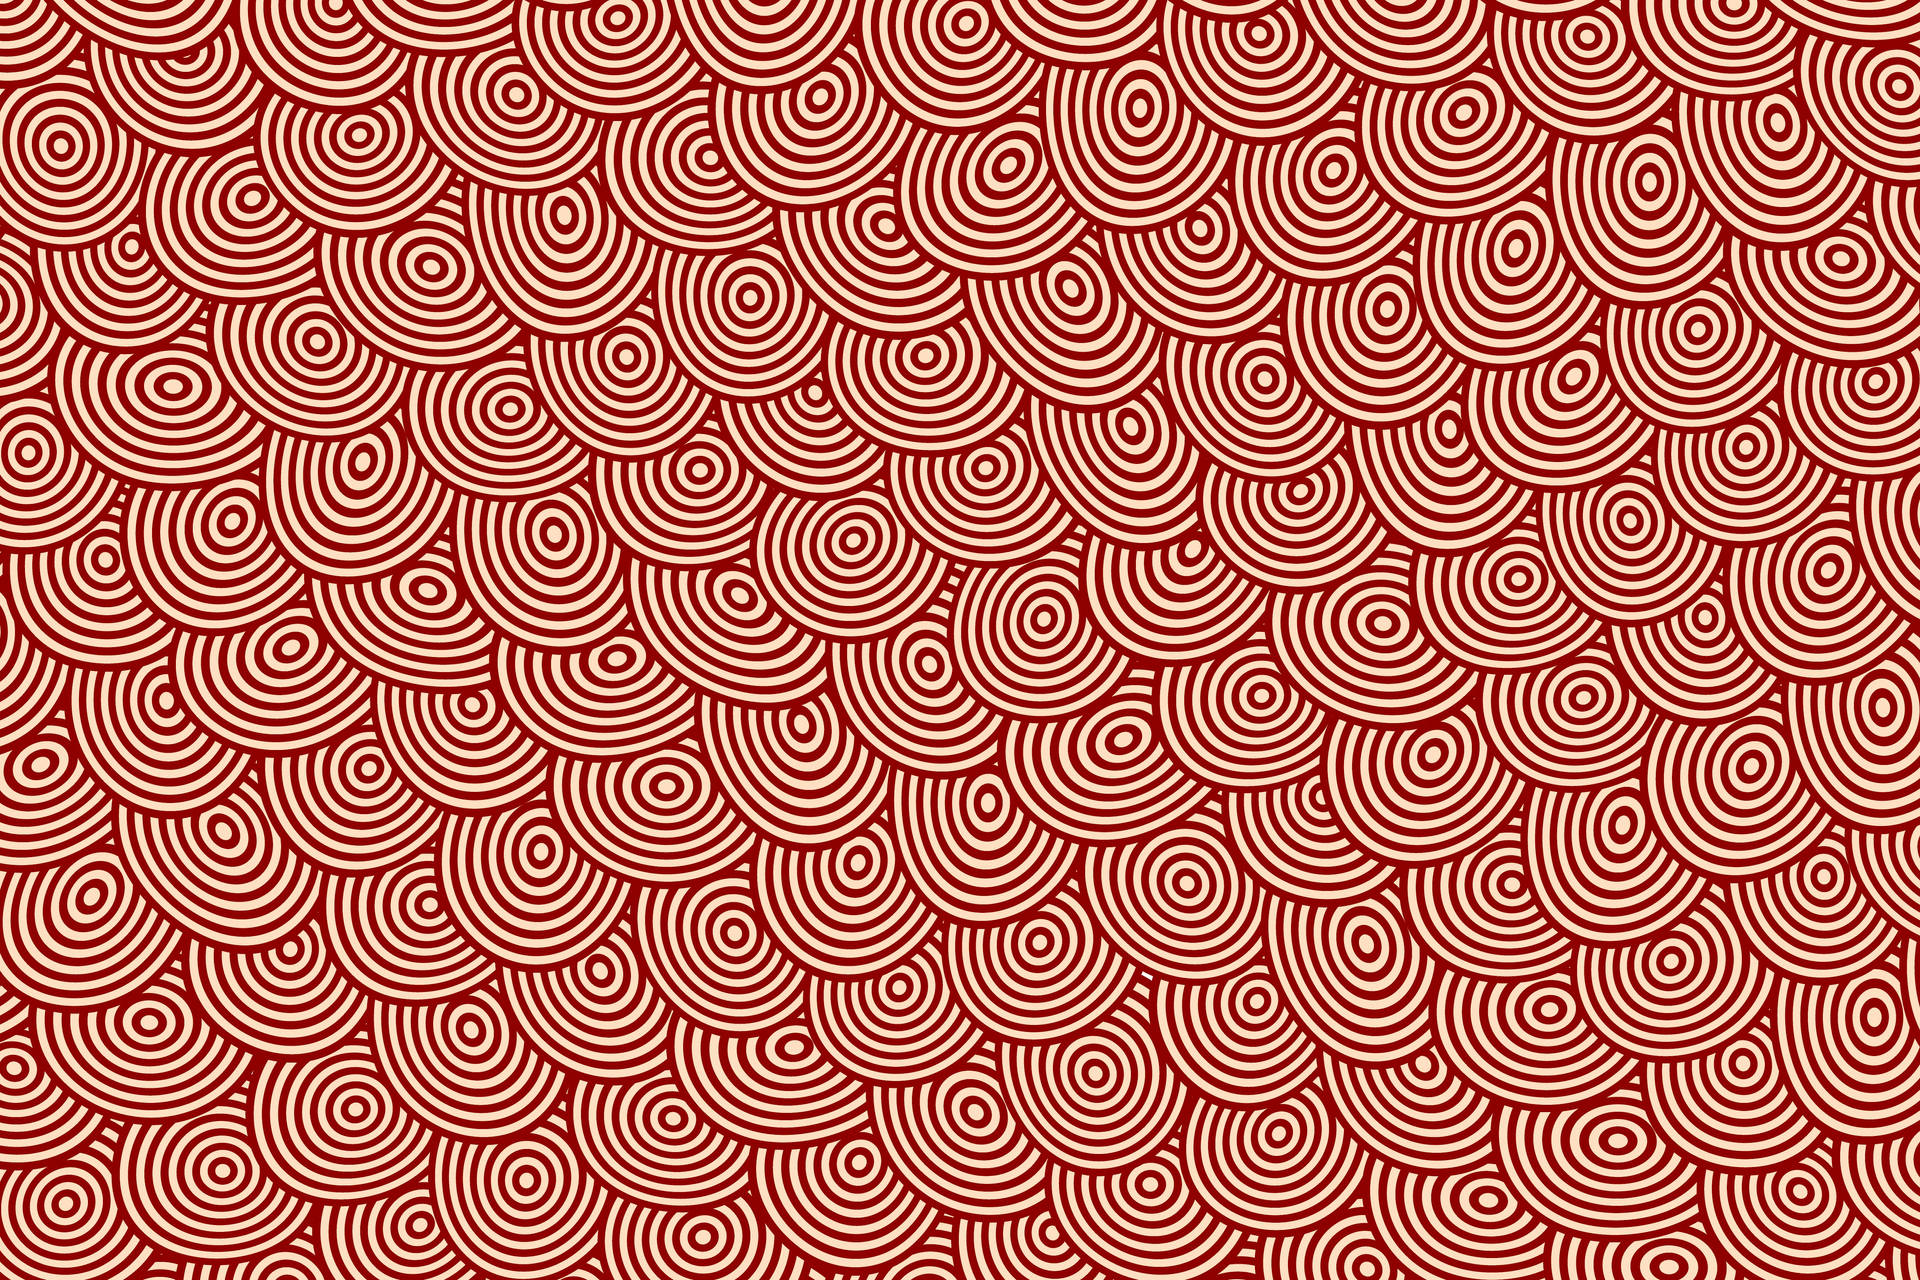 Textured Trippy Curves Background